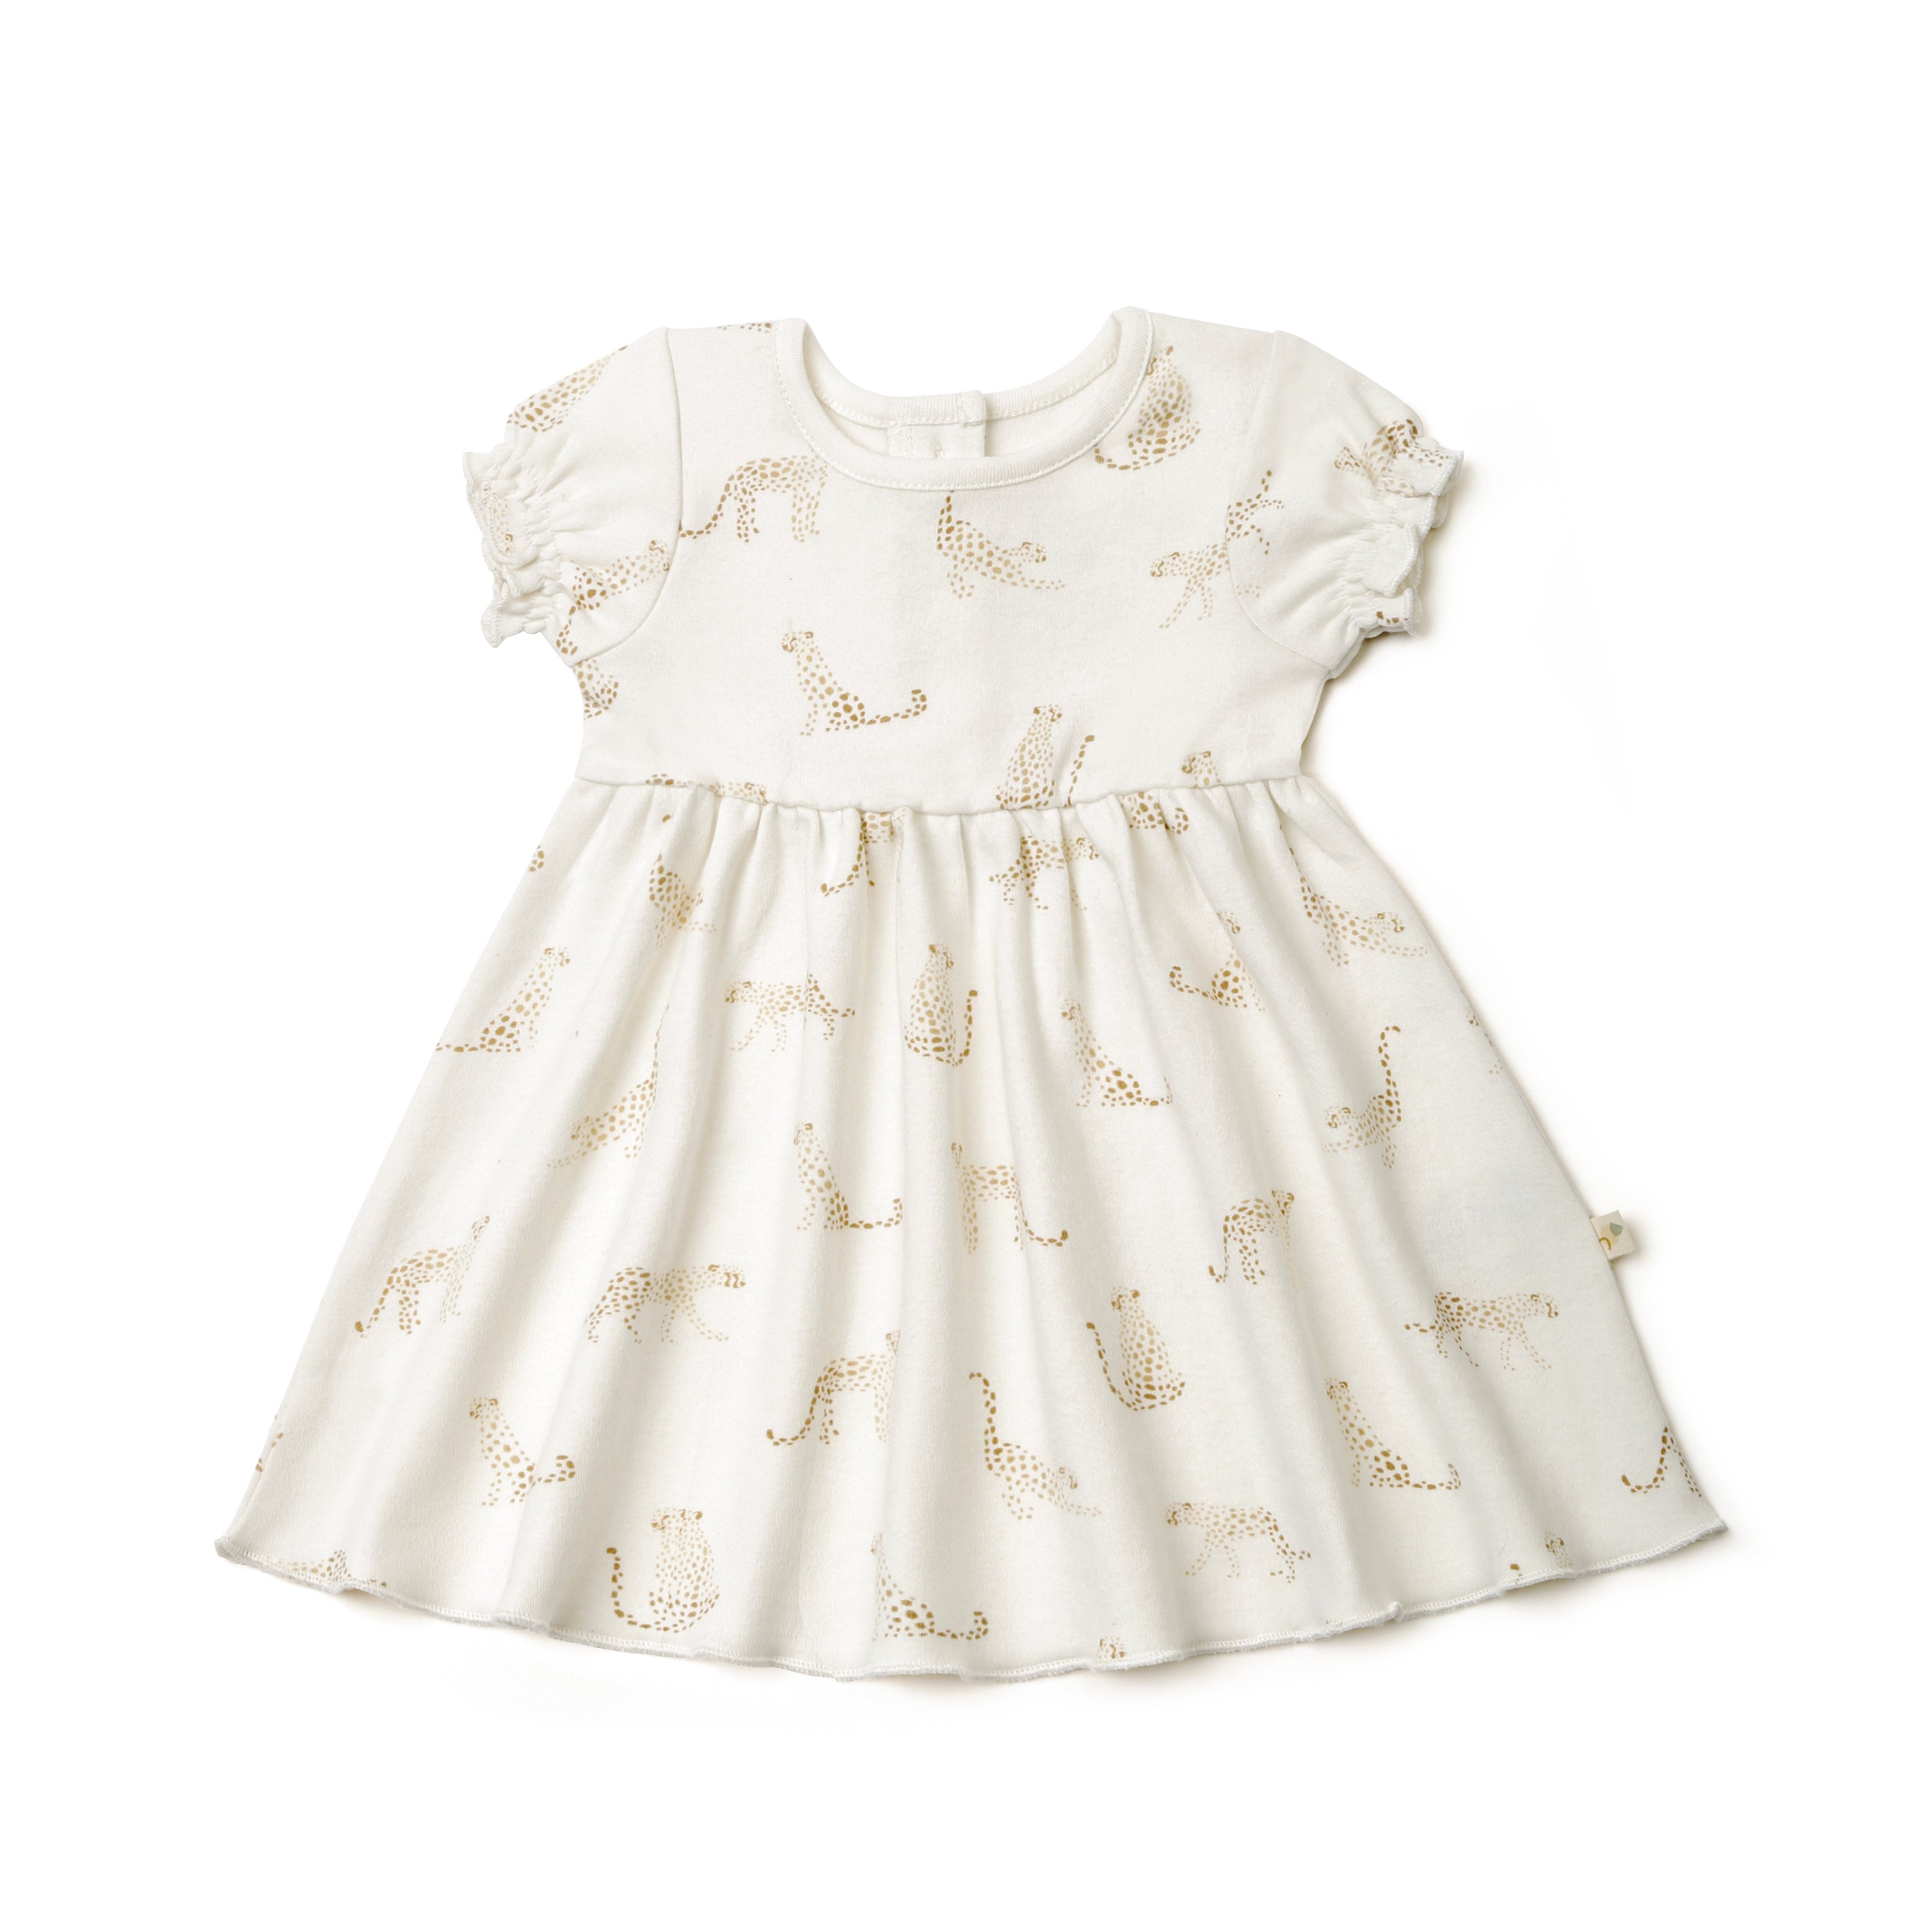 A white toddler dress with short ruffled sleeves and golden giraffe patterns from Organic Kids, displayed against a plain white background.